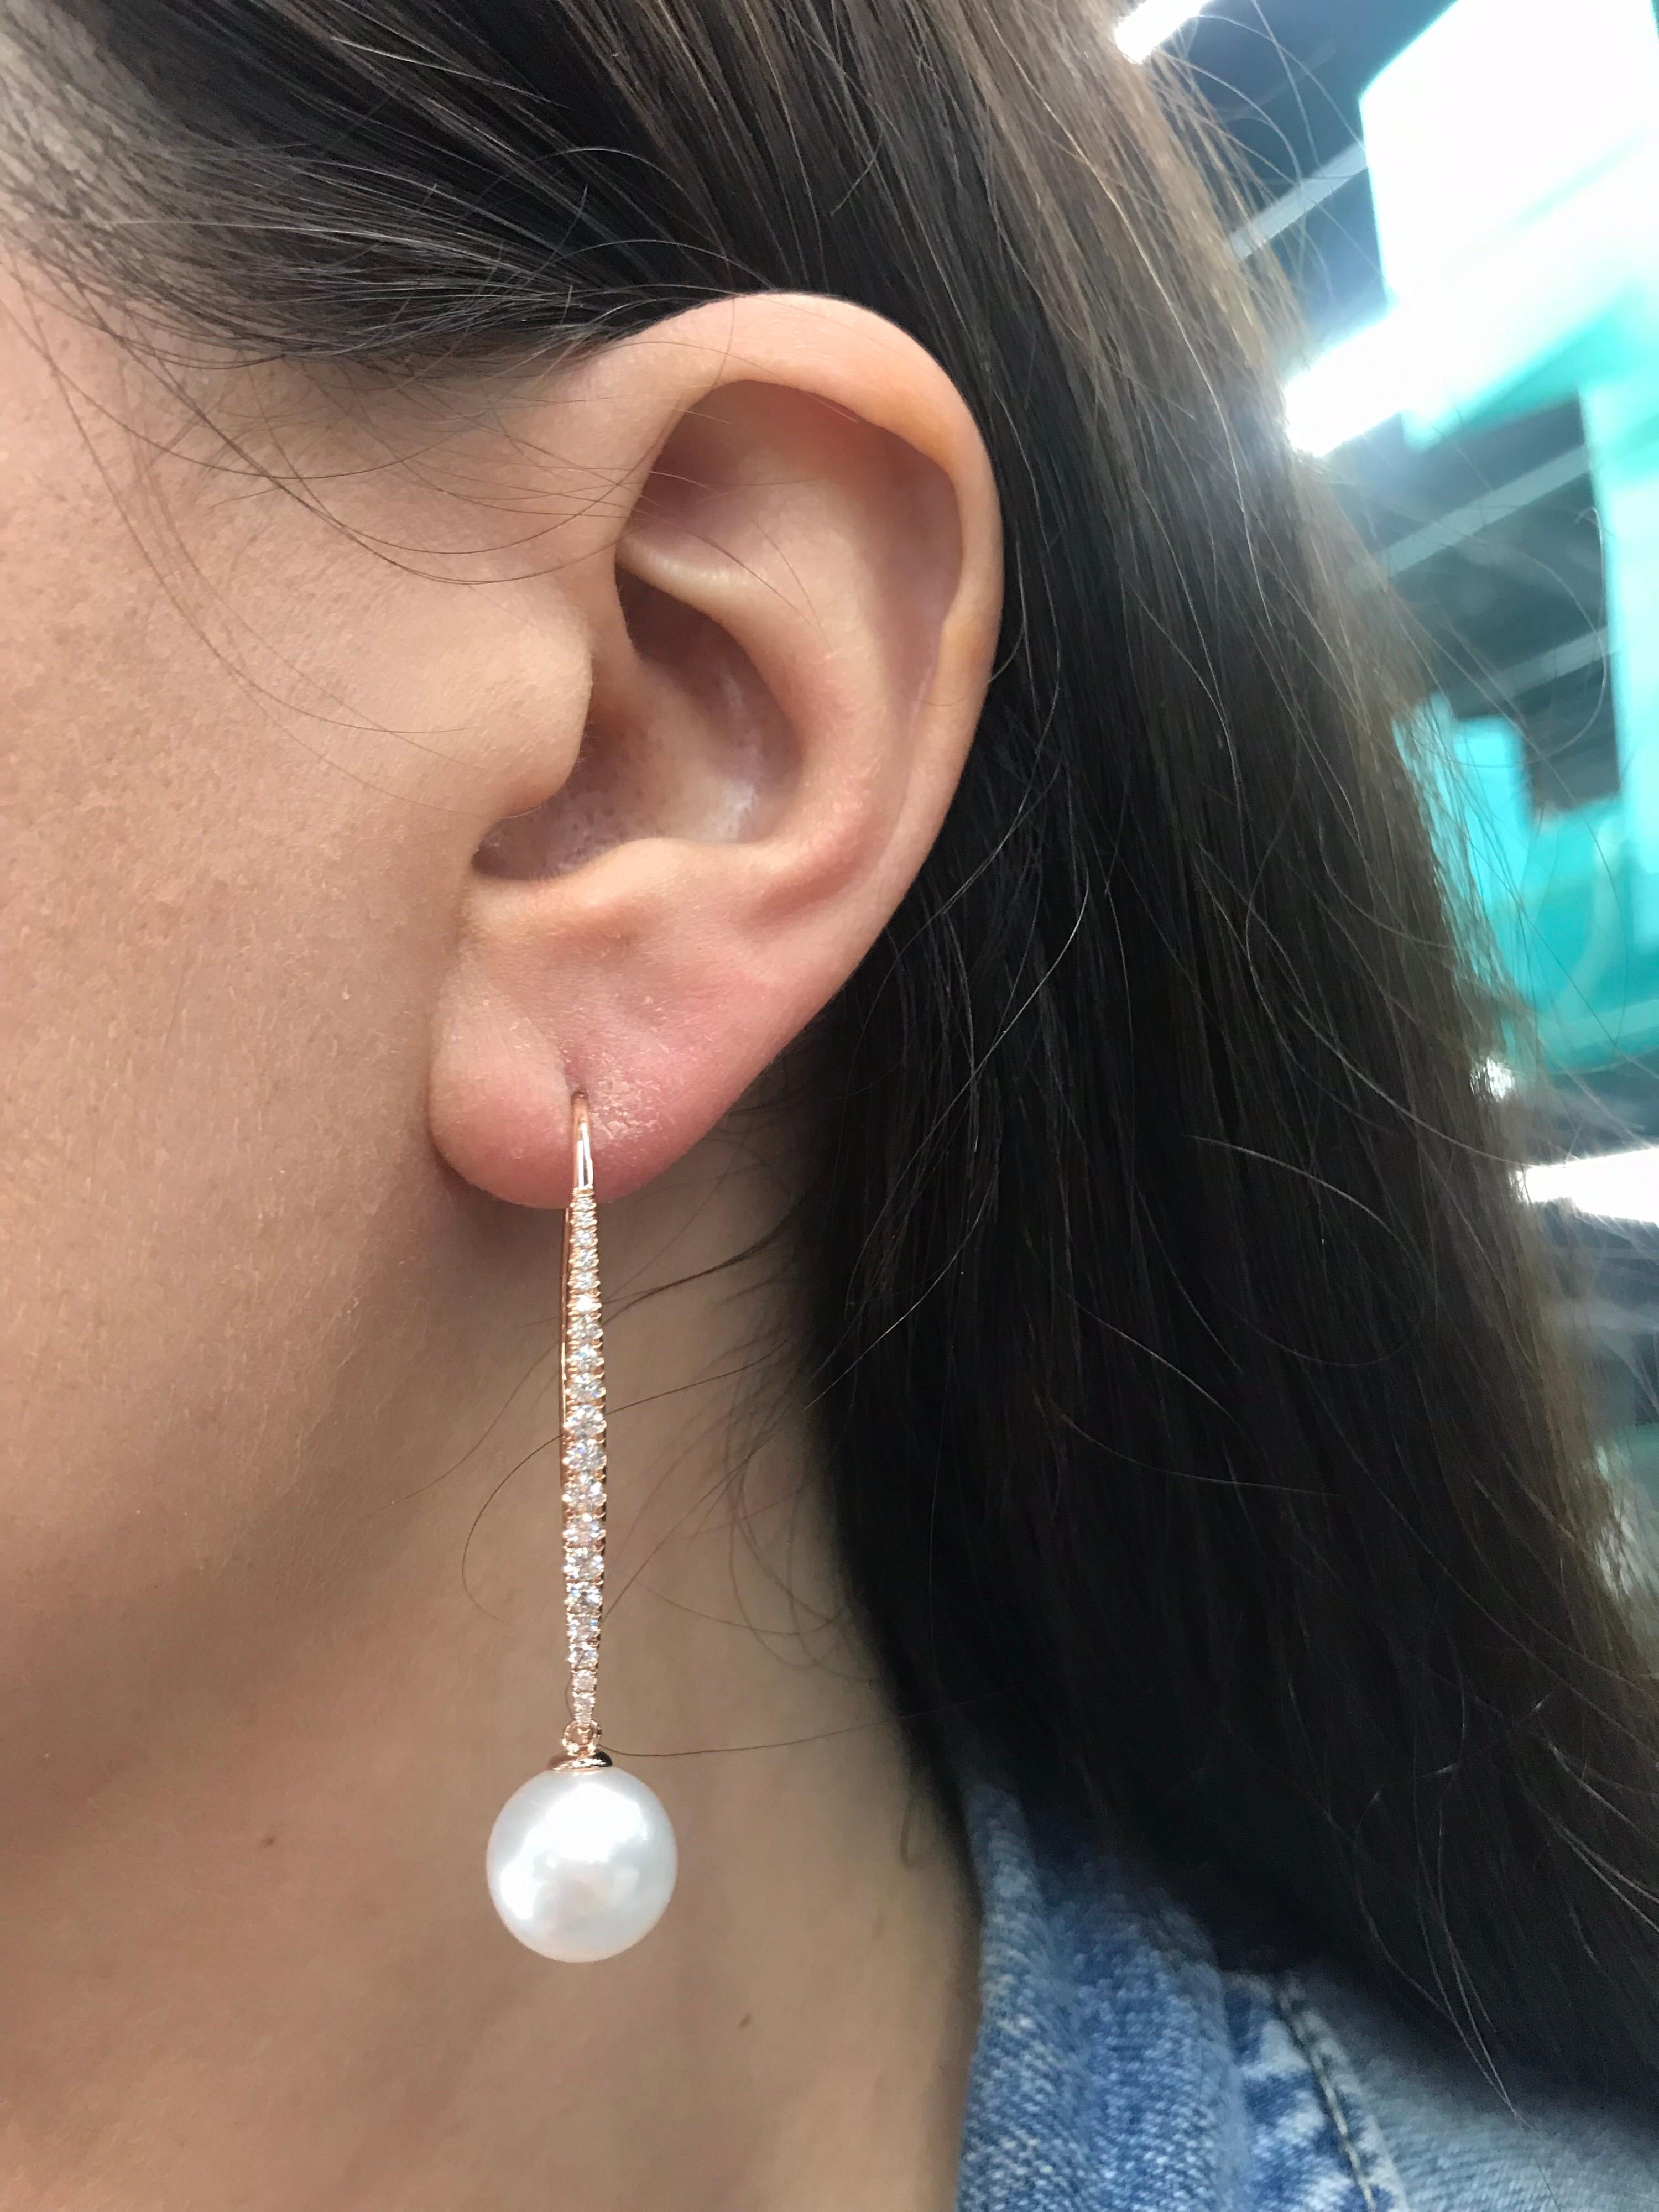 Fashionable 18k rose gold drop earrings featuring two South Sea pearls, 10-11 mm and round brilliants weighing 0.57 carats.
Color G-H
Clarity SI
Available in yellow & white gold.